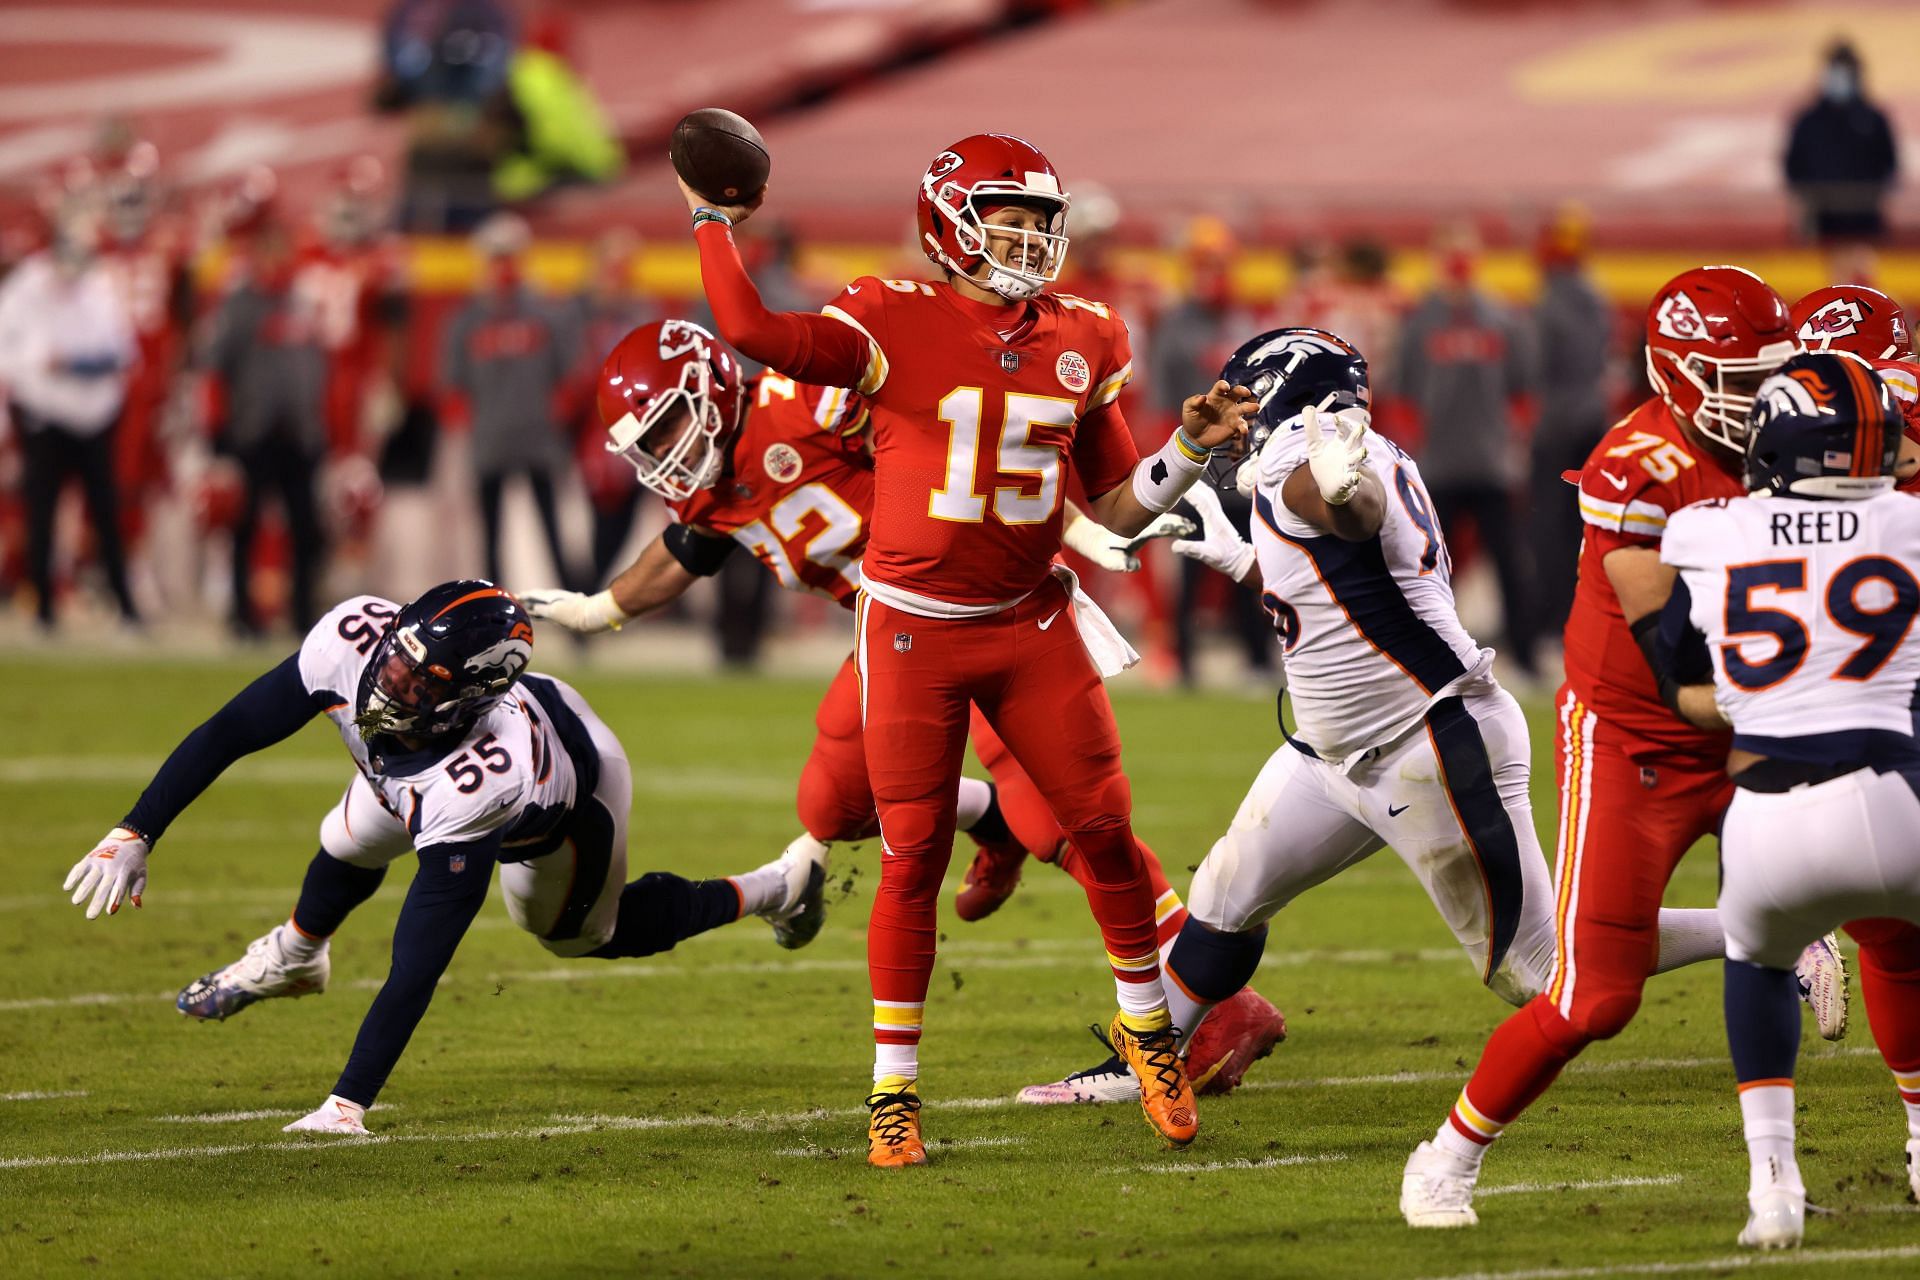 Broncos vs. Chiefs injury report and starting lineup - NFL Week 13 Sunday Night Football